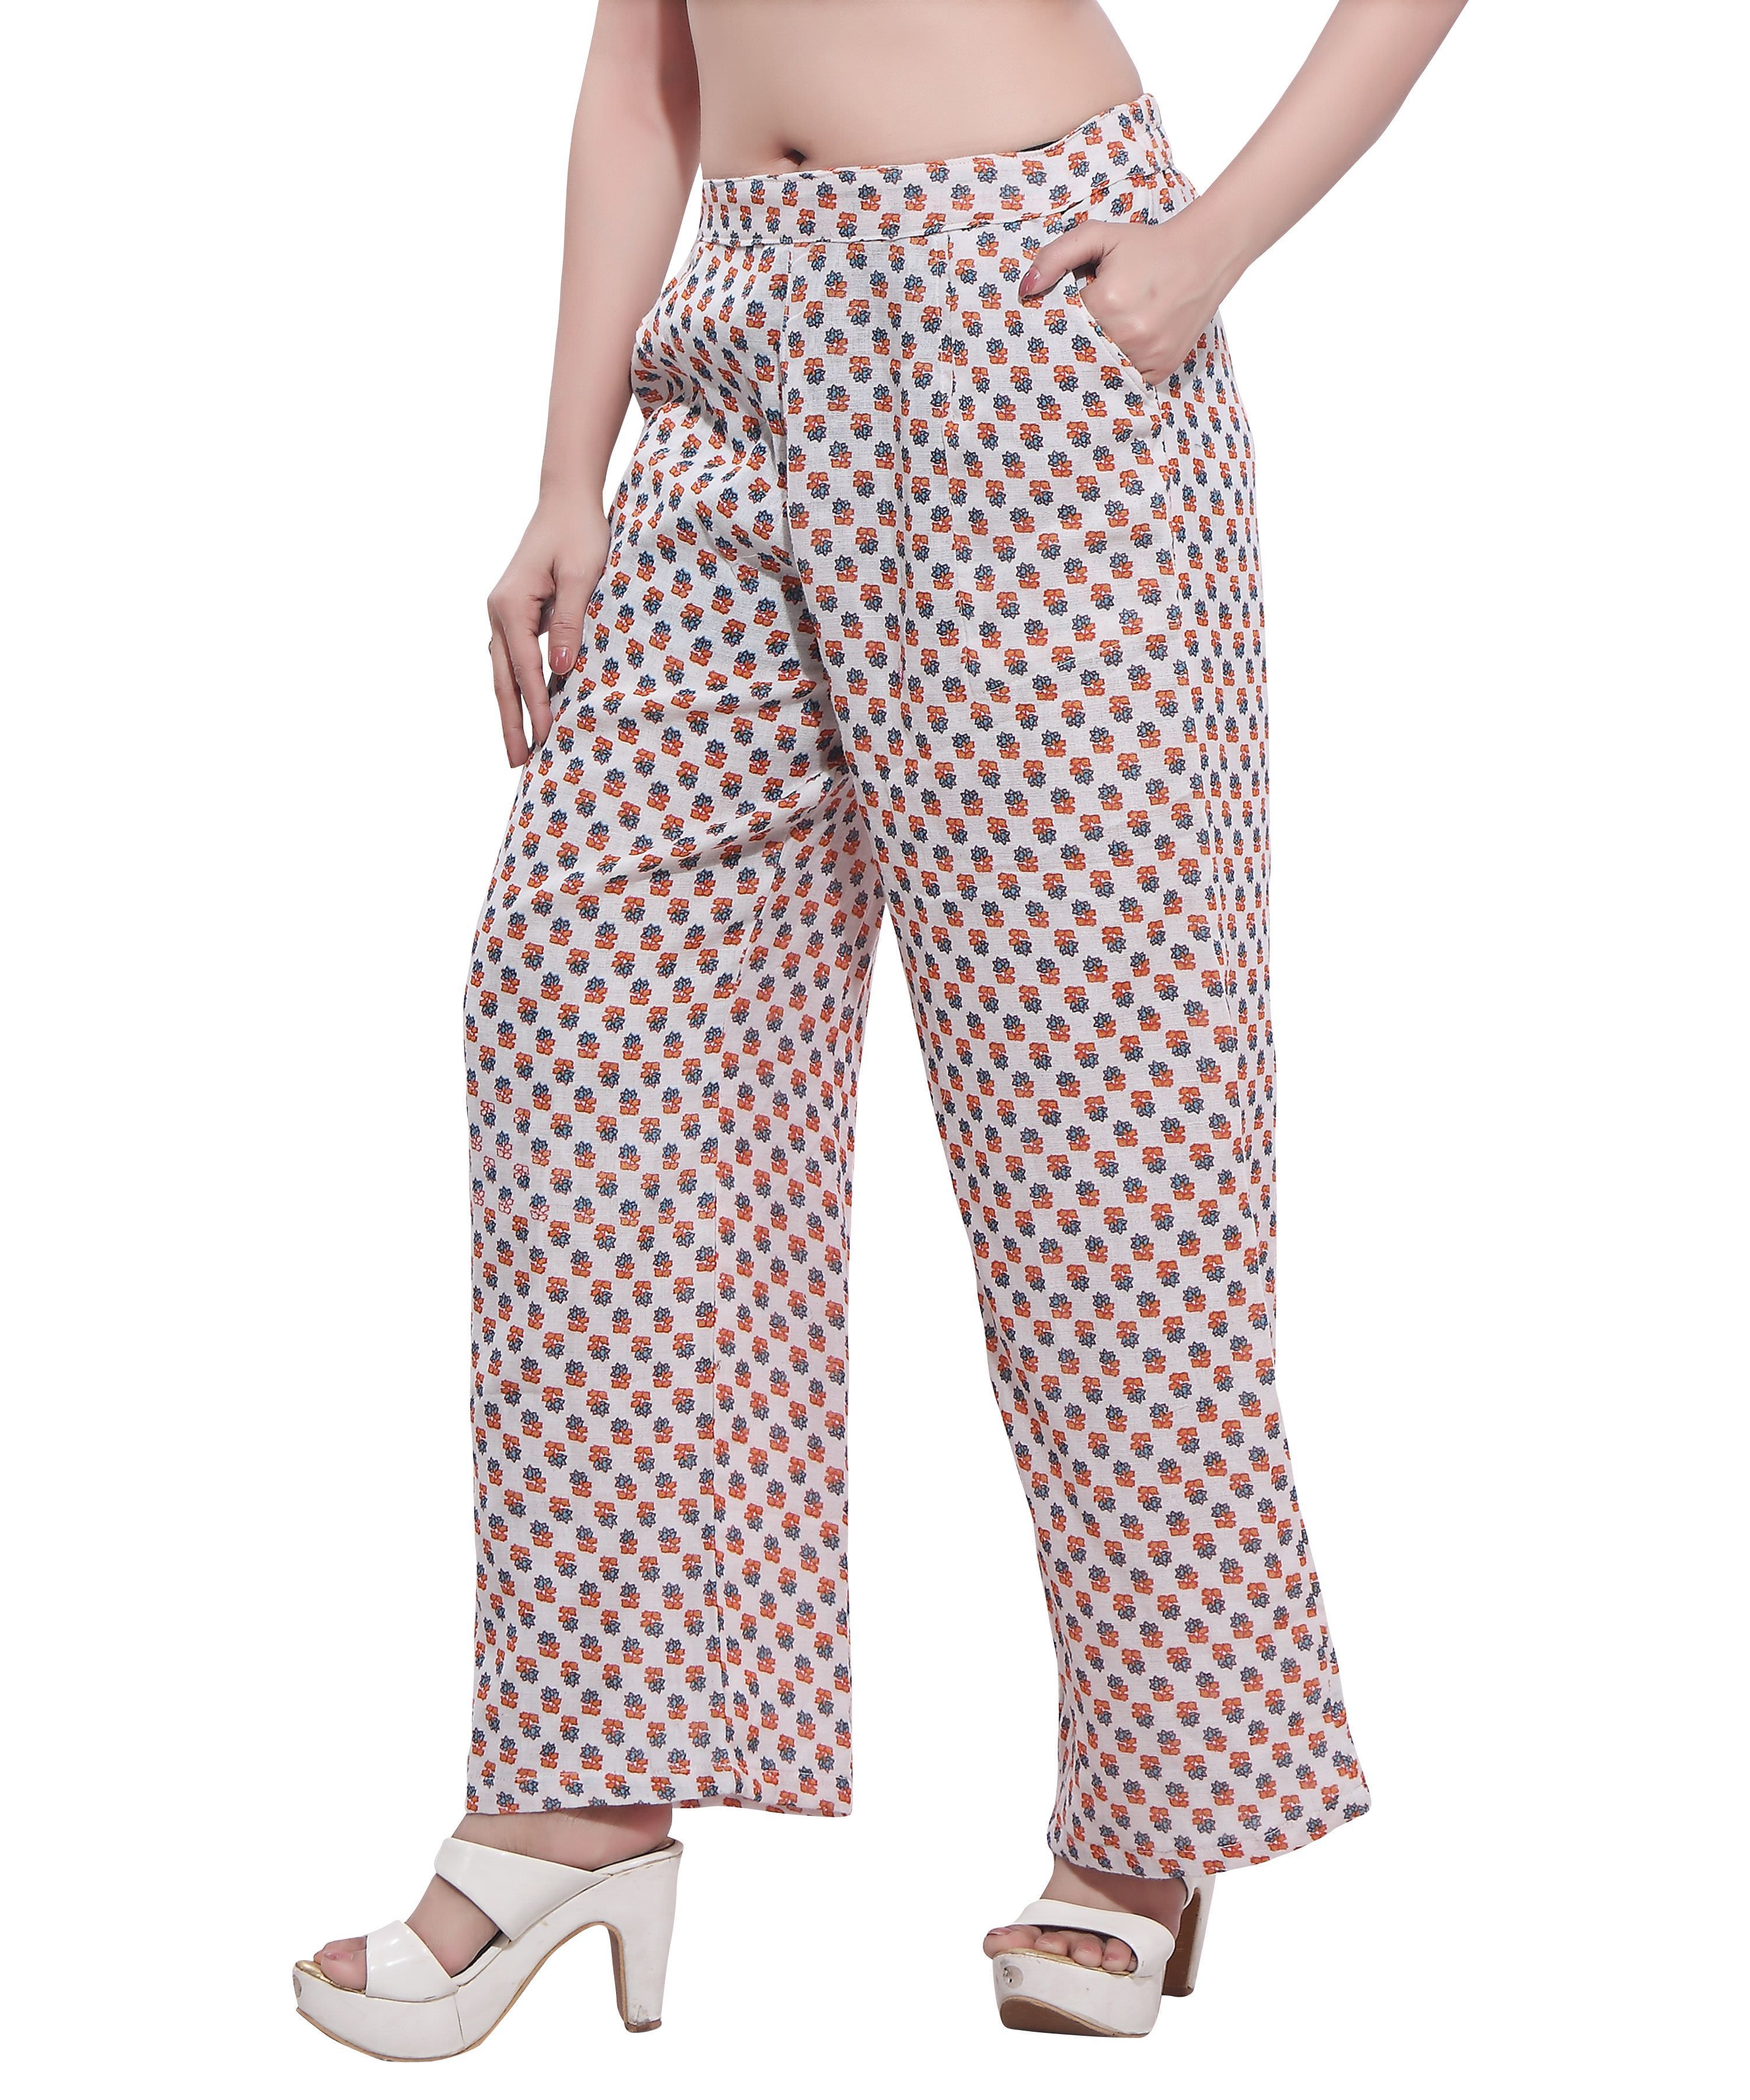 Buy Jublee Cotton Palazzos Online at Best Prices in India - Snapdeal